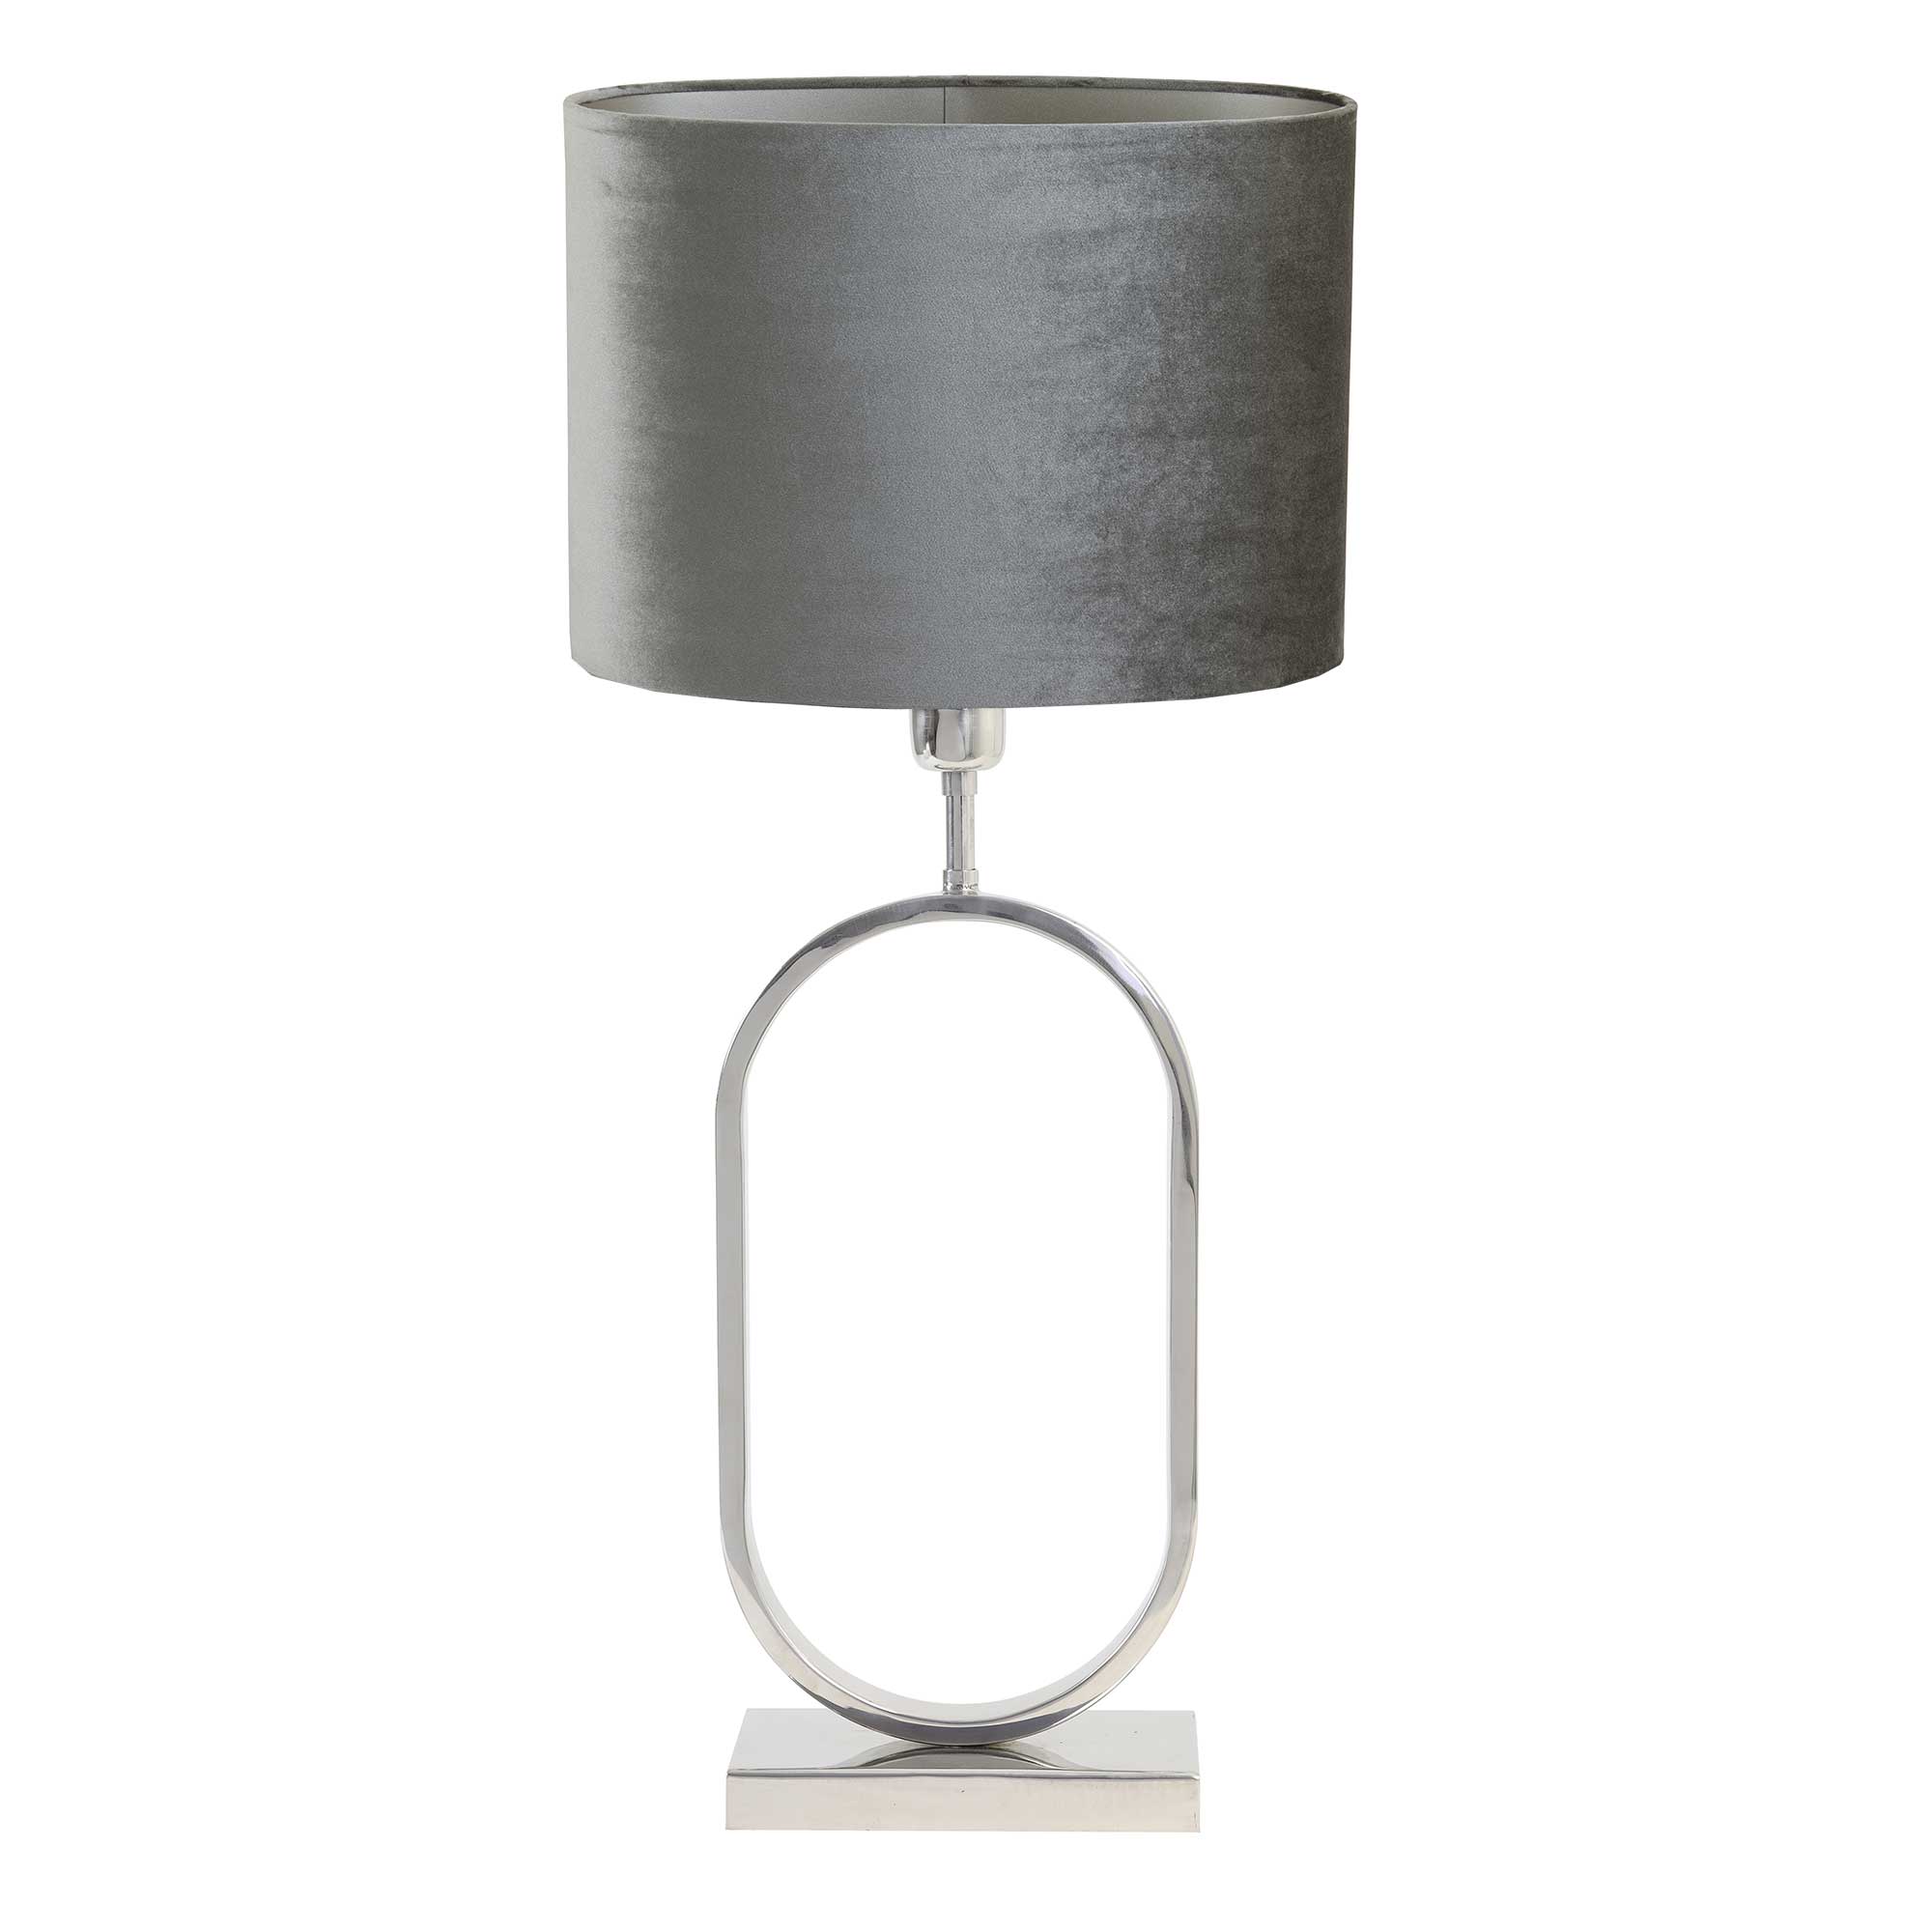 Chrome Oval Table Lamp, Silver Metal | Barker & Stonehouse